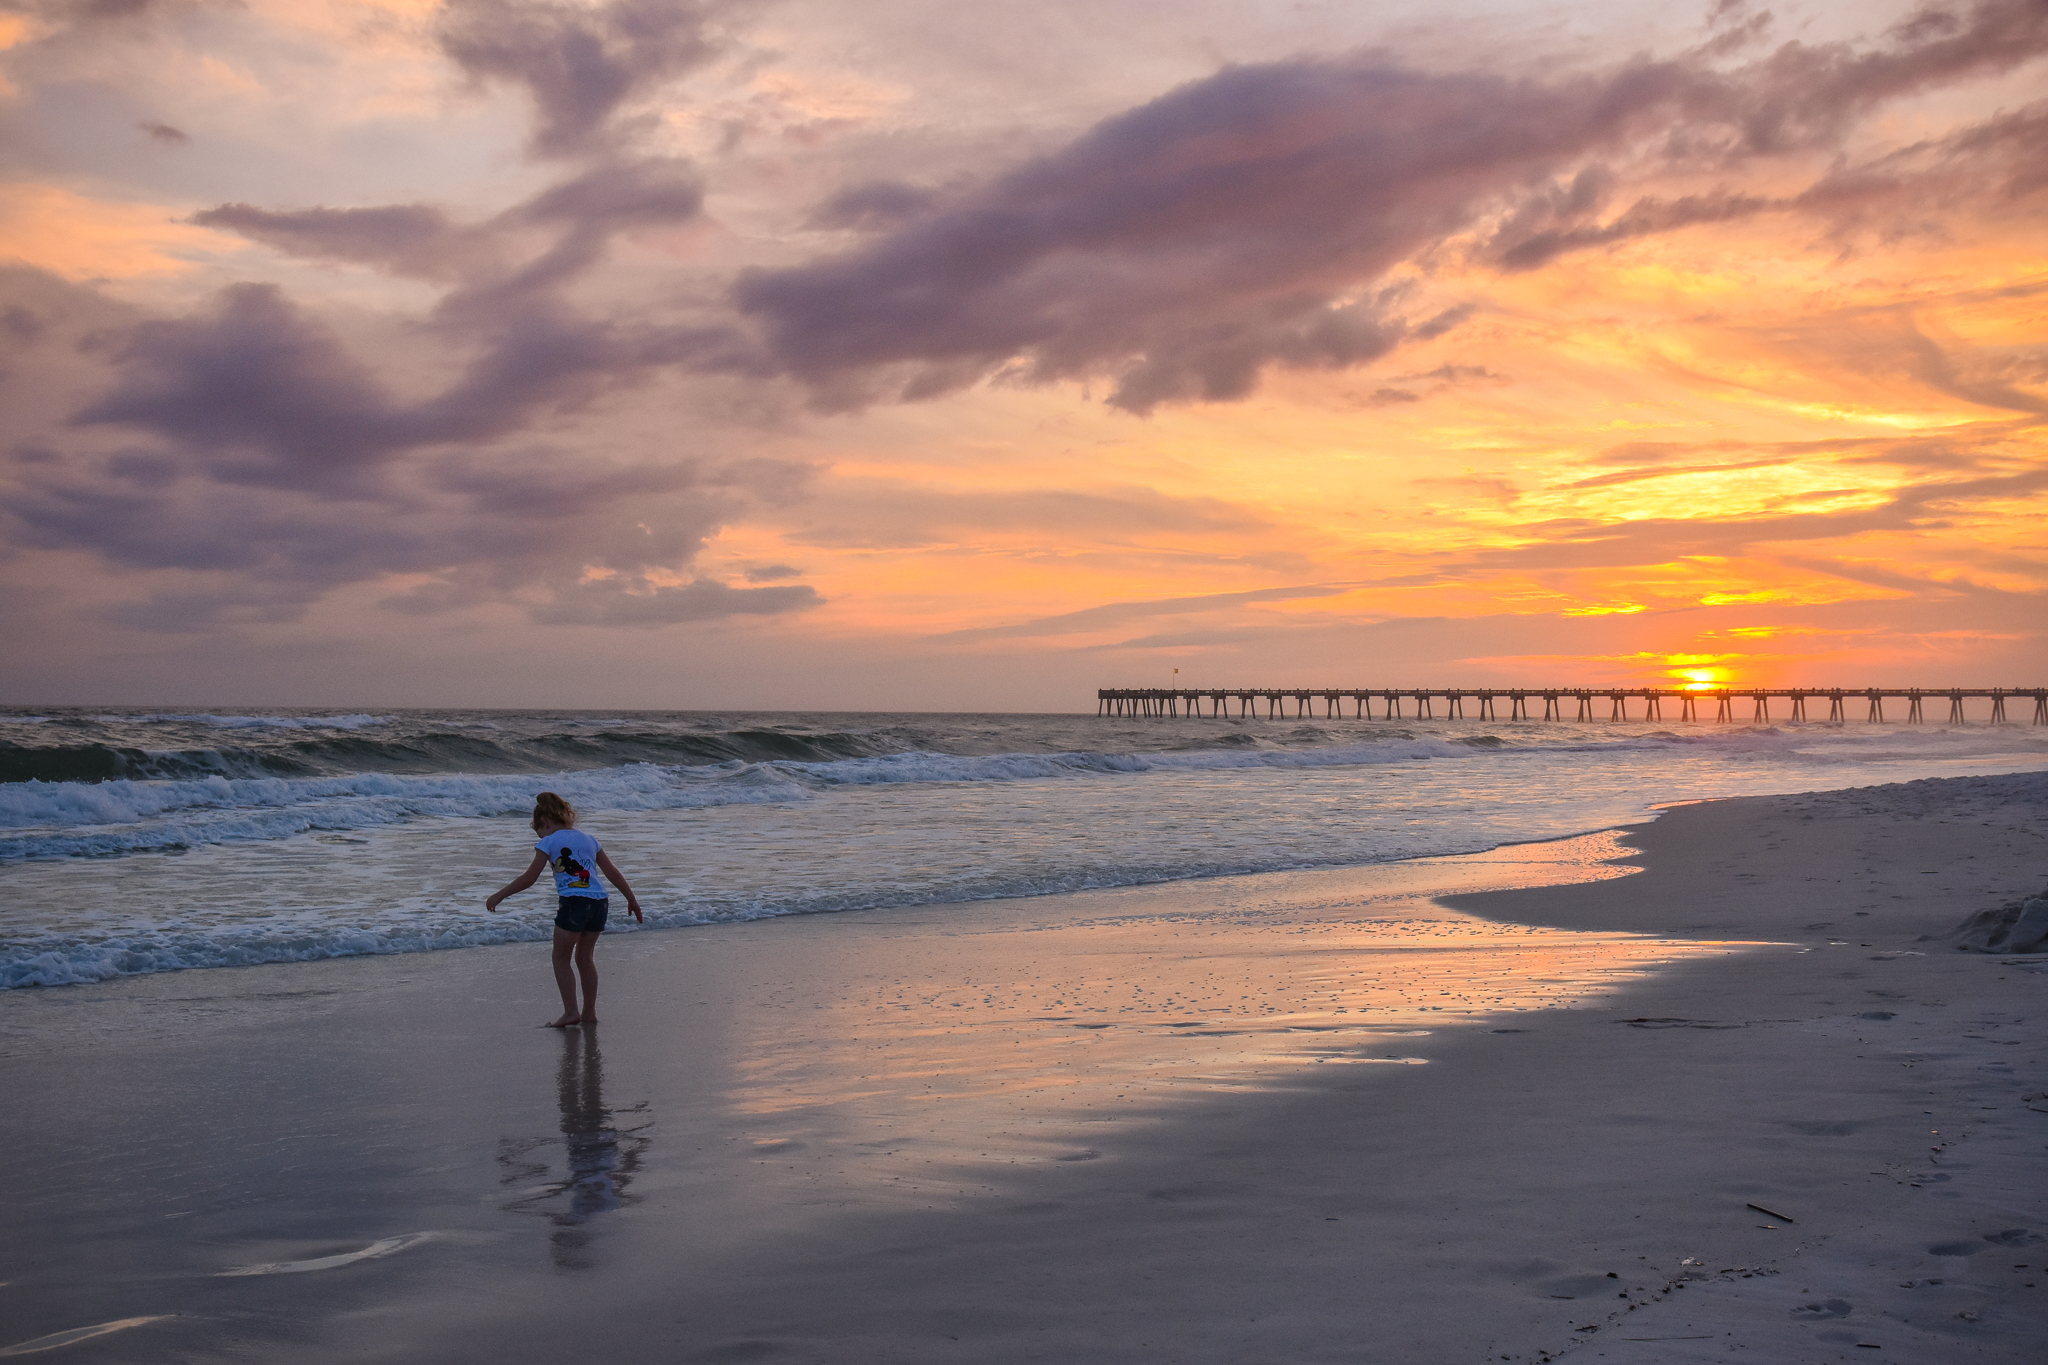 The sun setting behind the Pensacola pier with a young girl playing in the surf